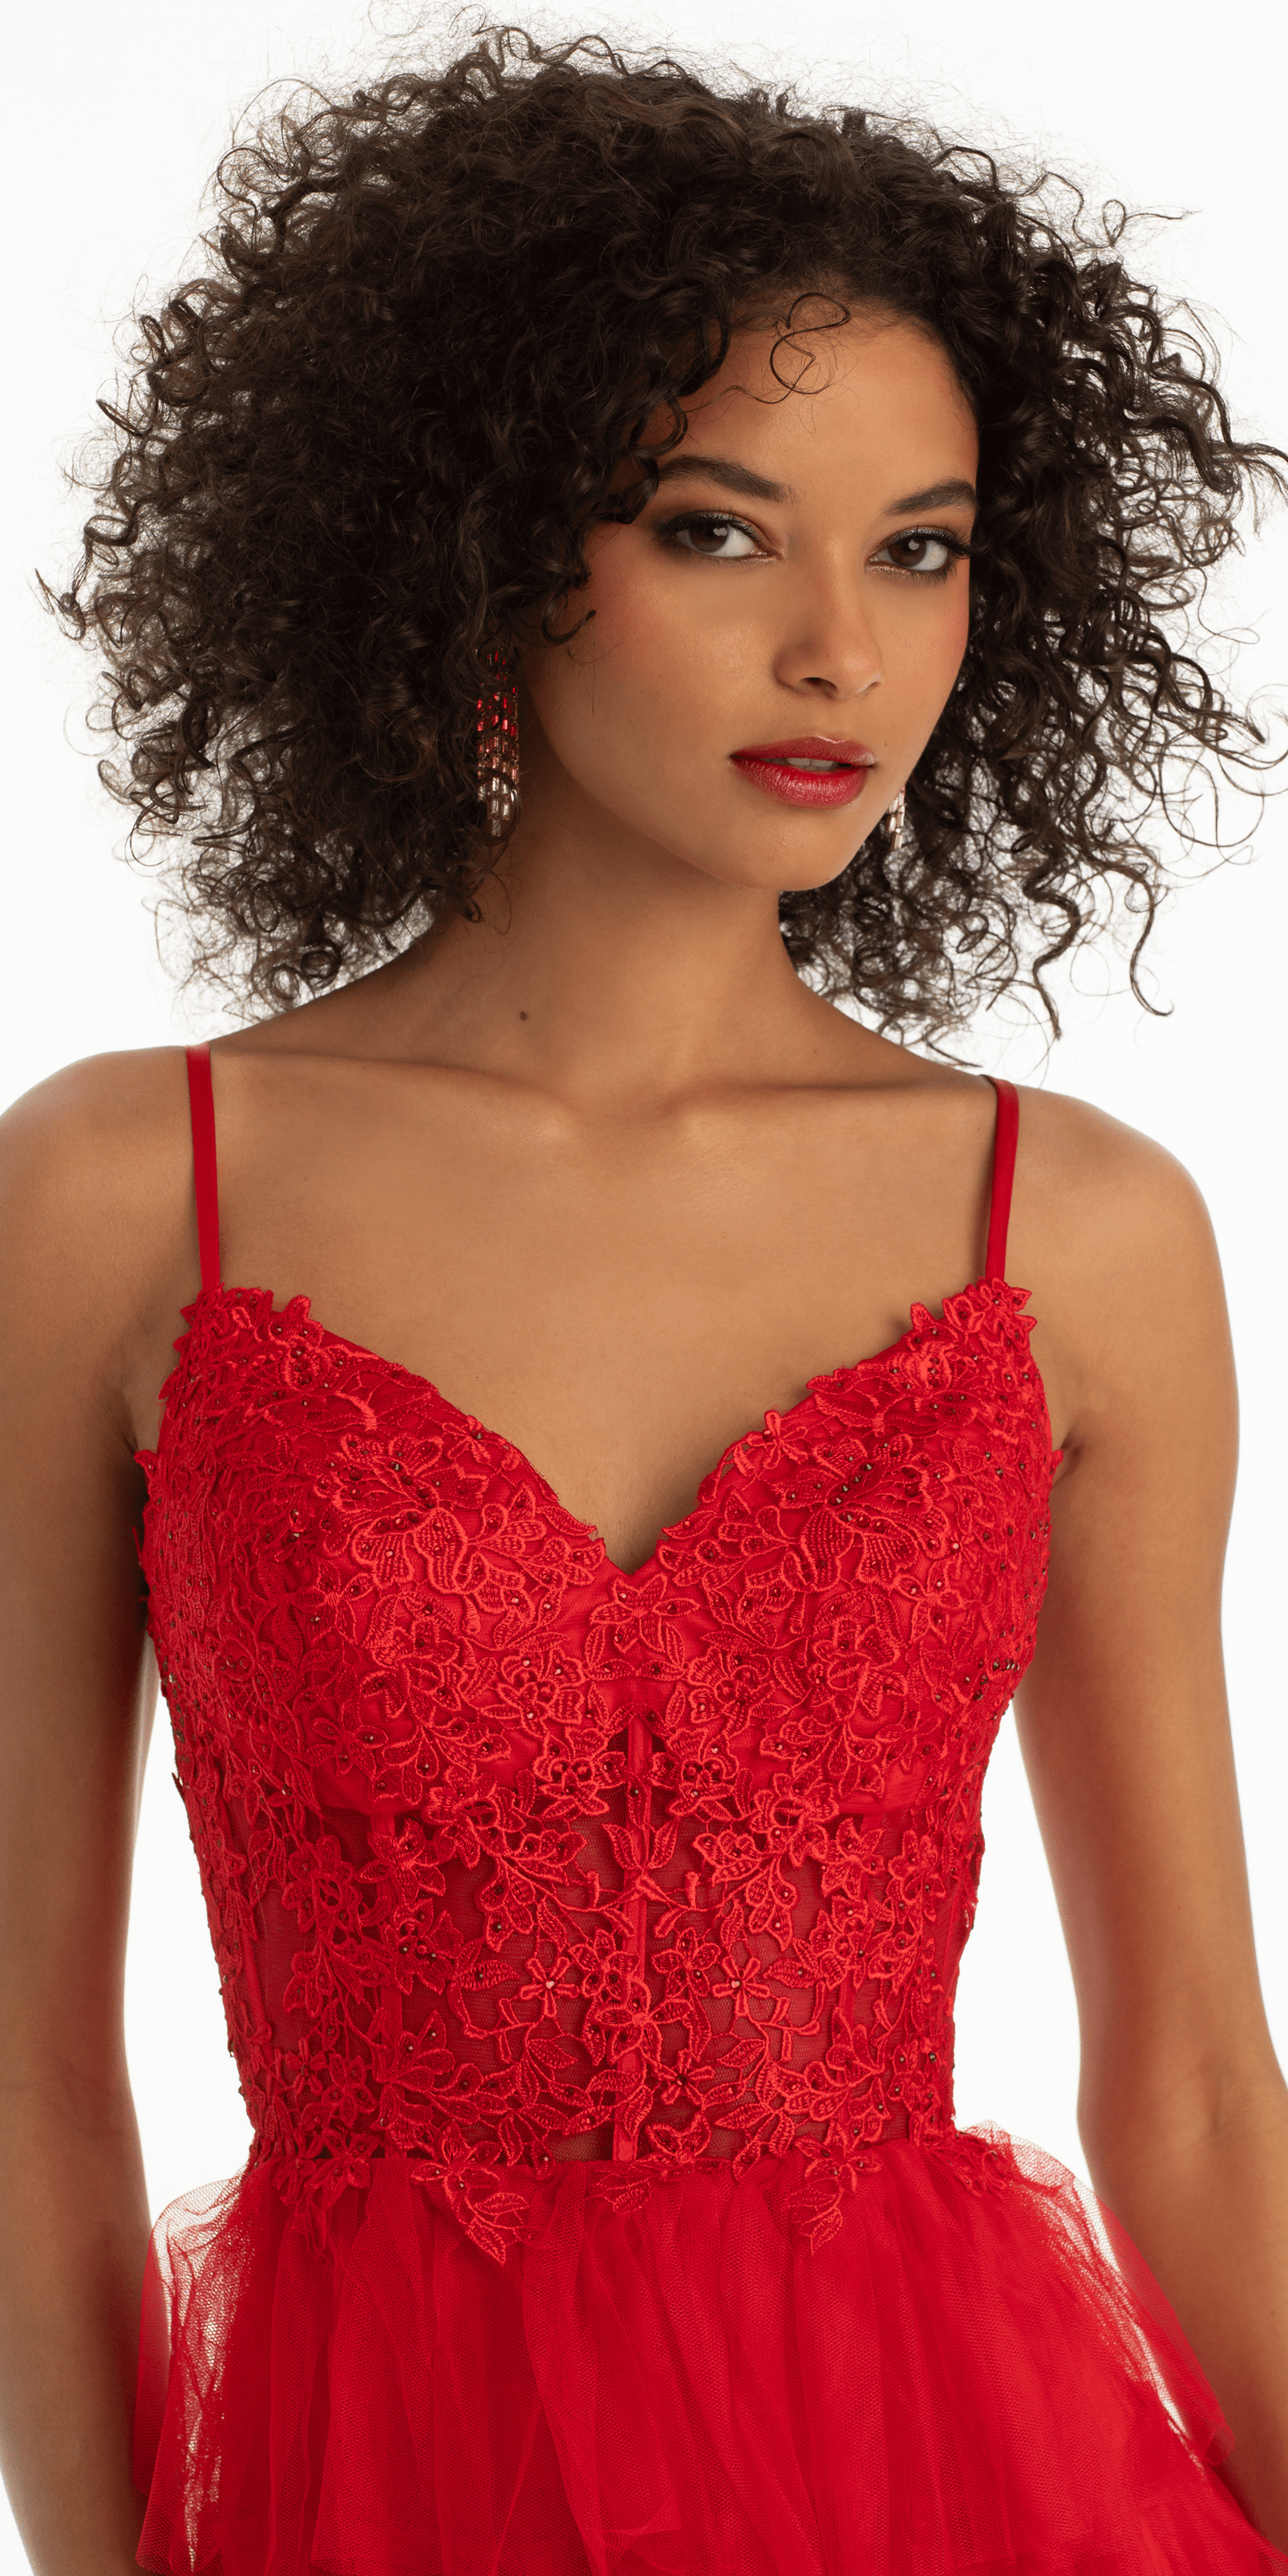 Camille La Vie Mesh Tiered Corset Keyhole Back Ballgown missy / 0 / red